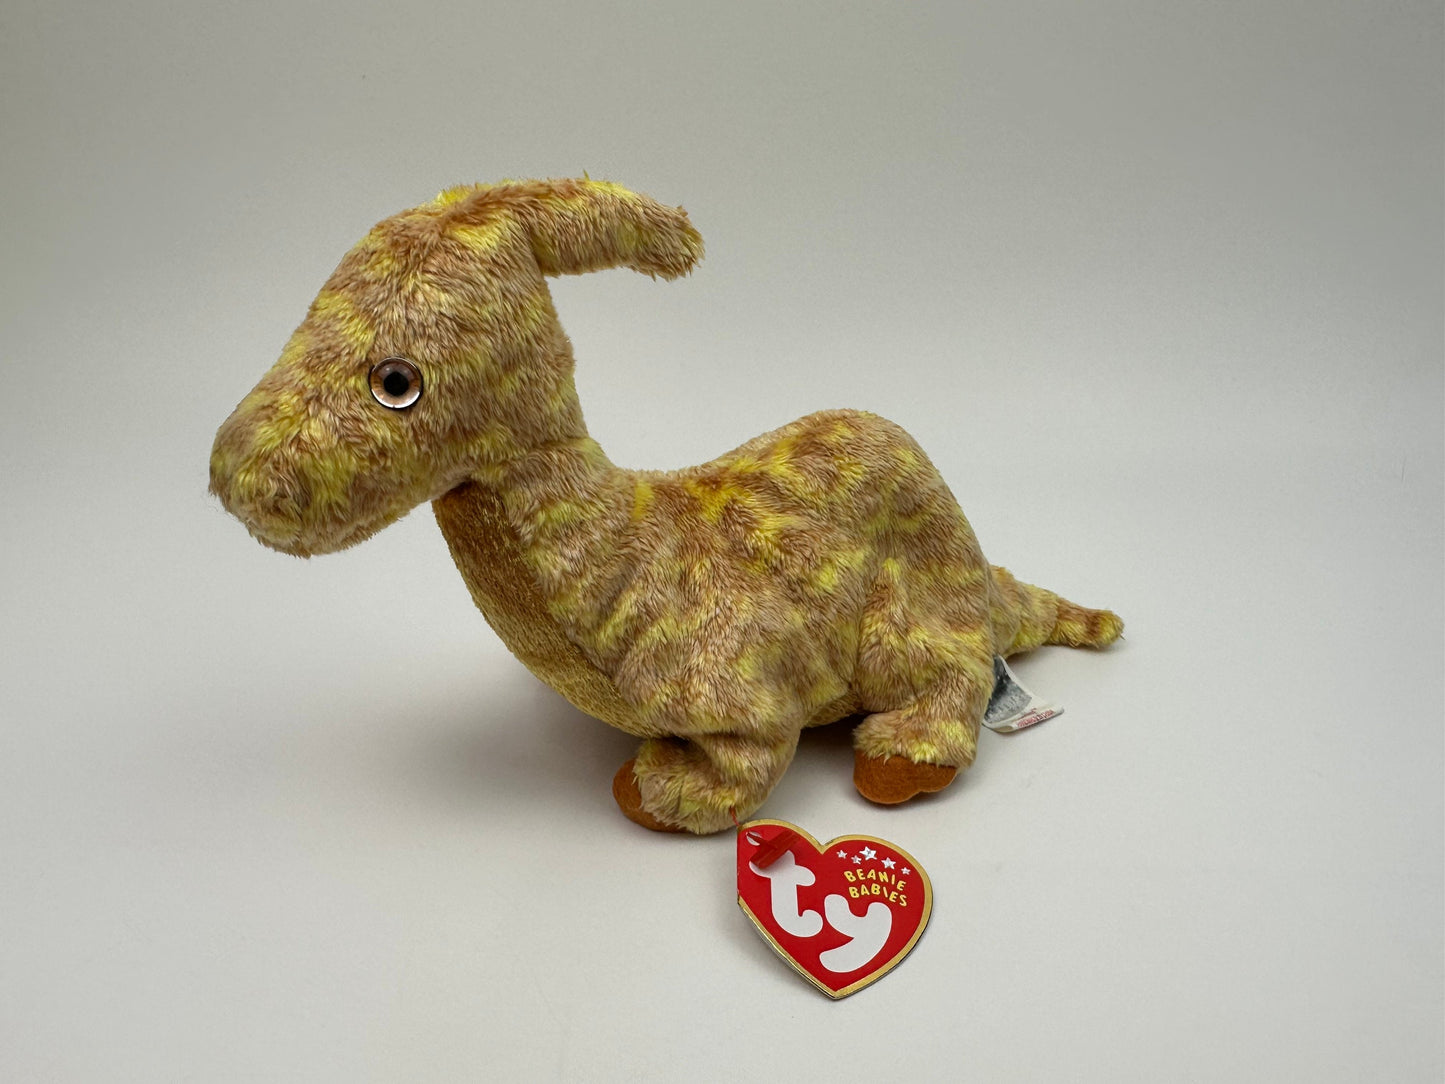 Ty Beanie Baby “Tooter” the Adorable Dinosaur Plush (8 inch)